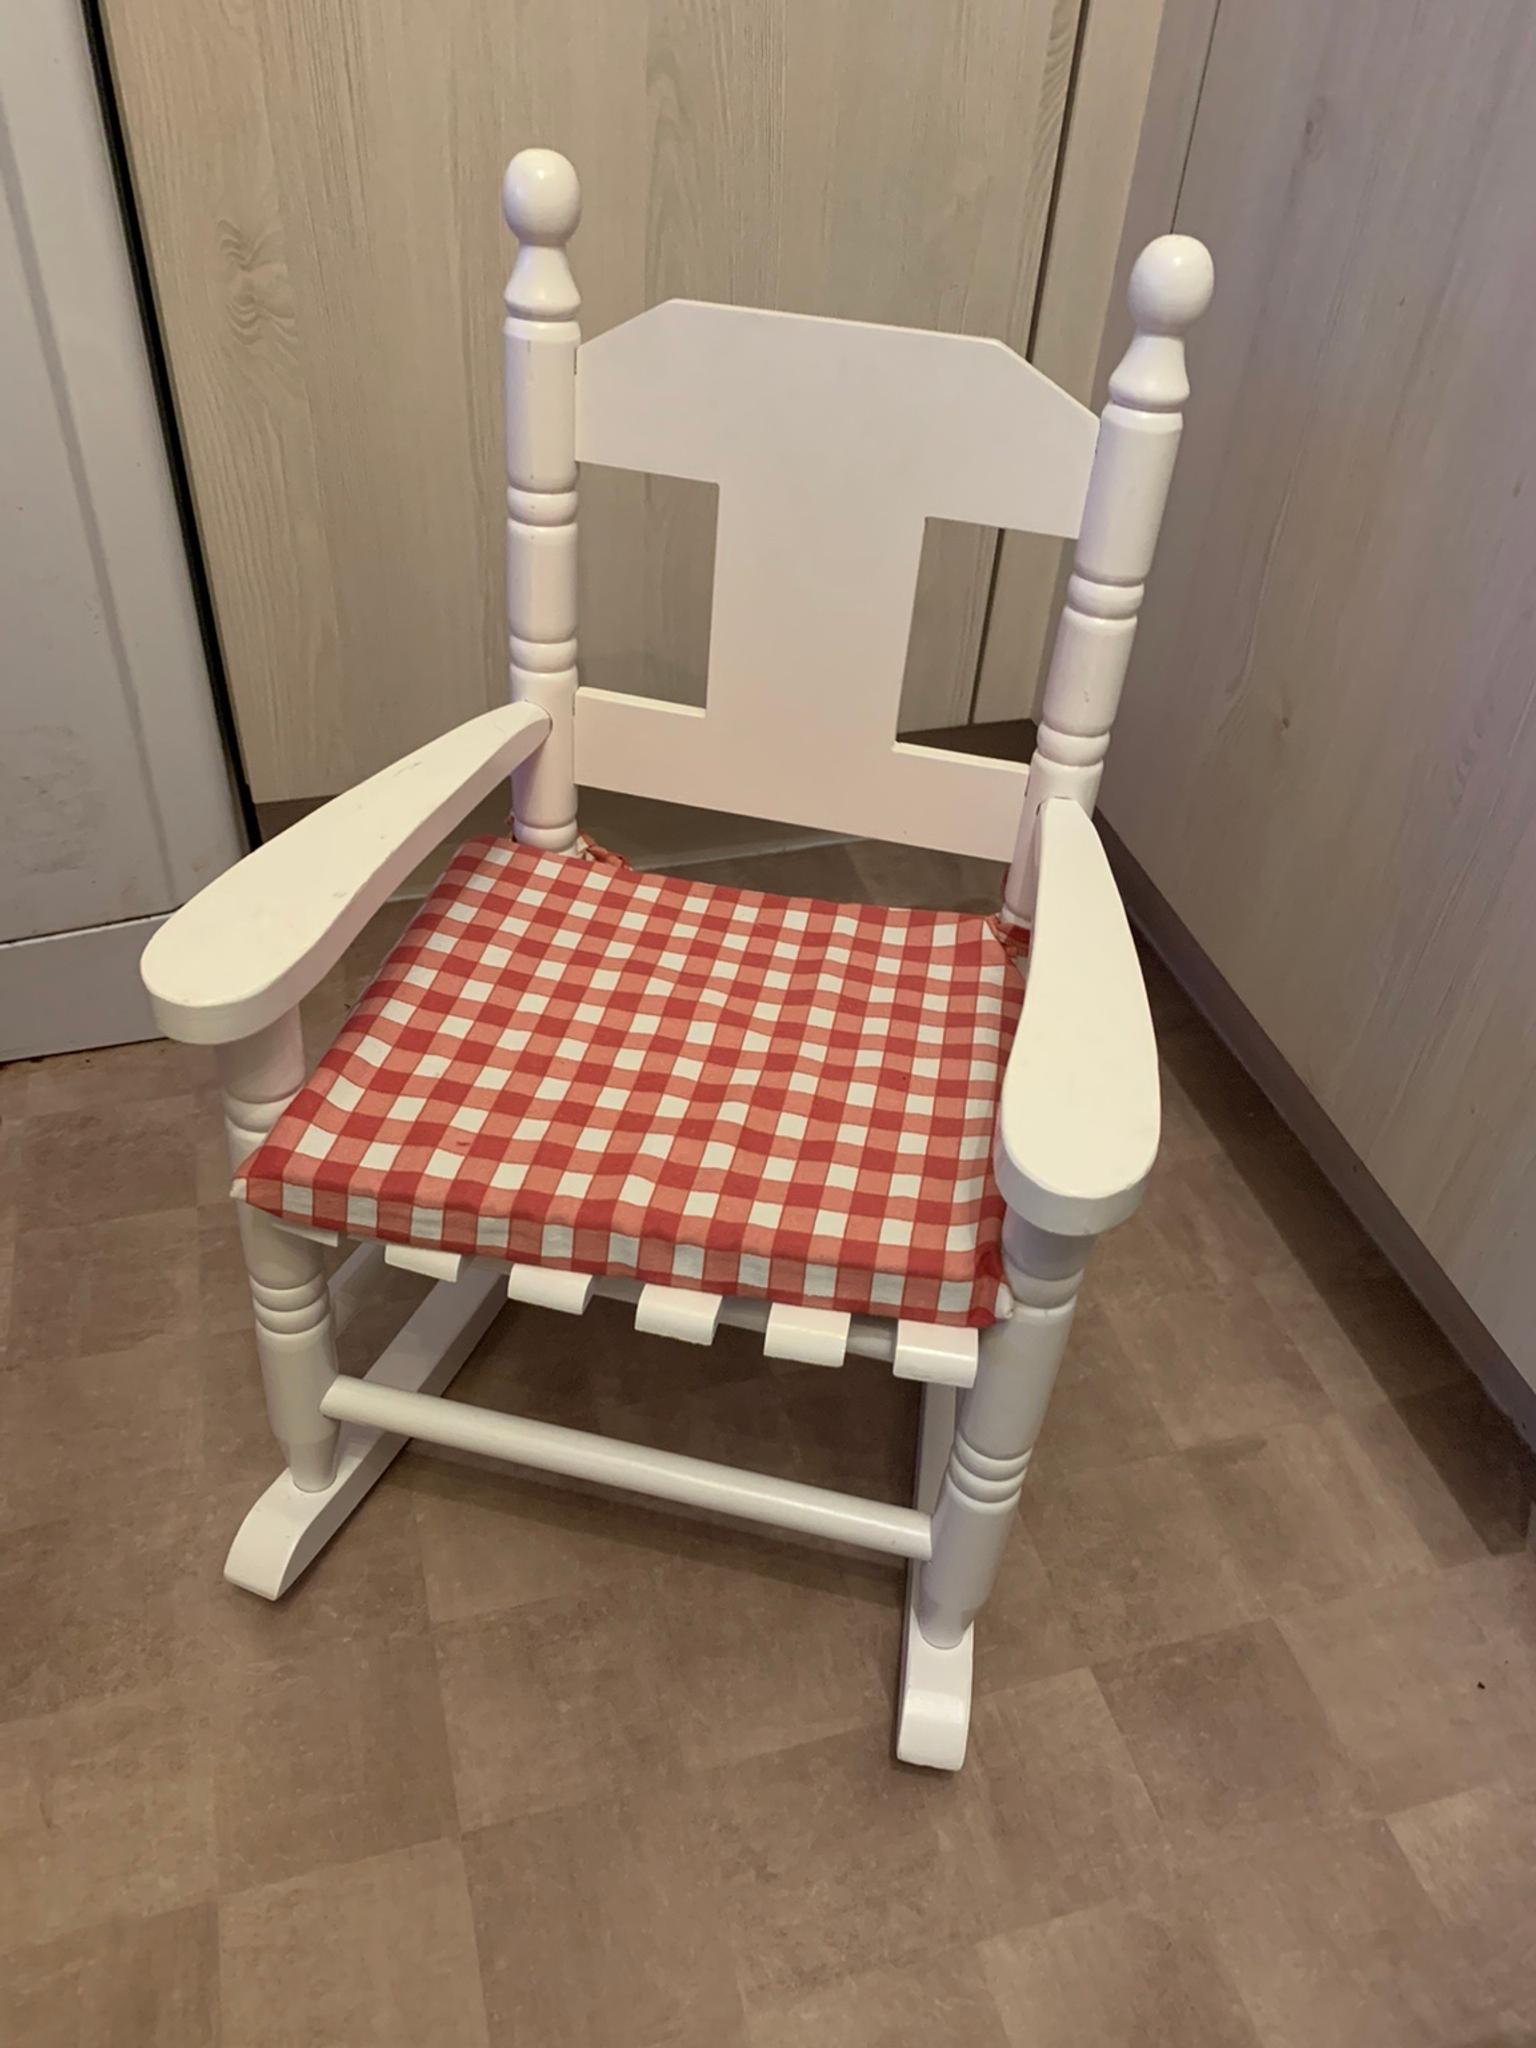 baby wooden rocking chair